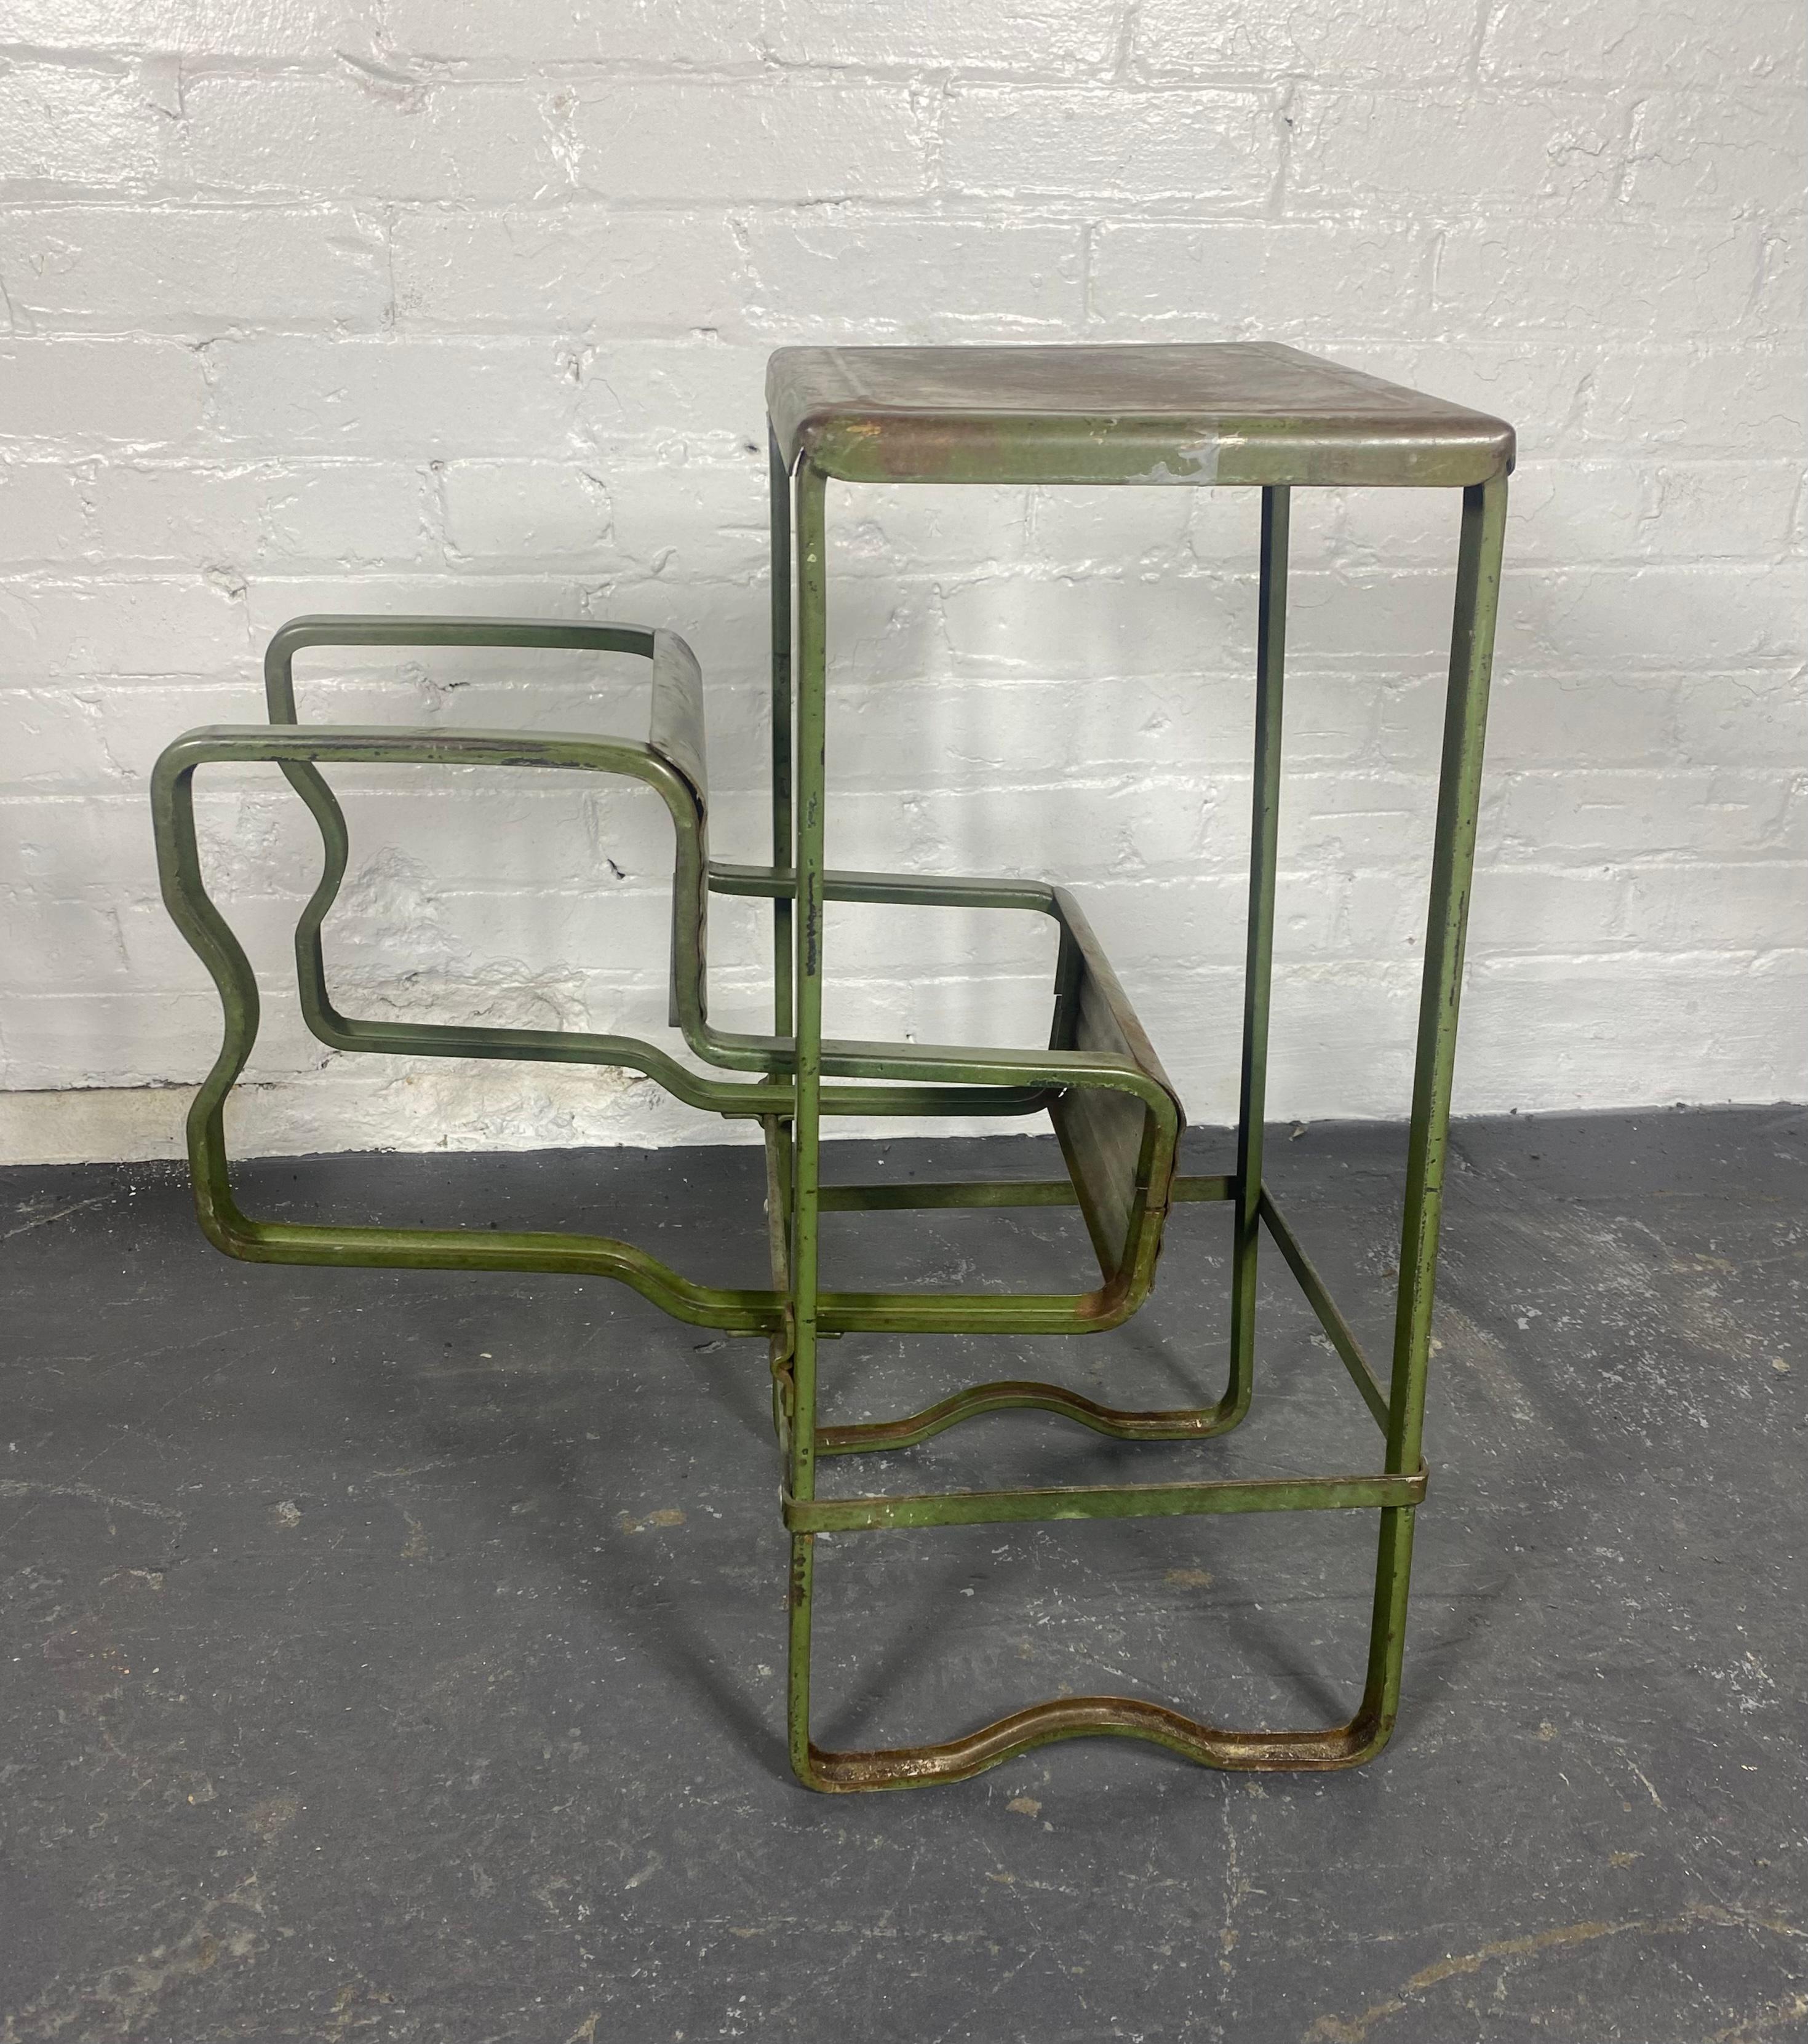 1920s -30s Industrial Pressed steel step stool, wonderful patina ,  old factory green paint  Amazing design. Piece of art , sculpture,,23